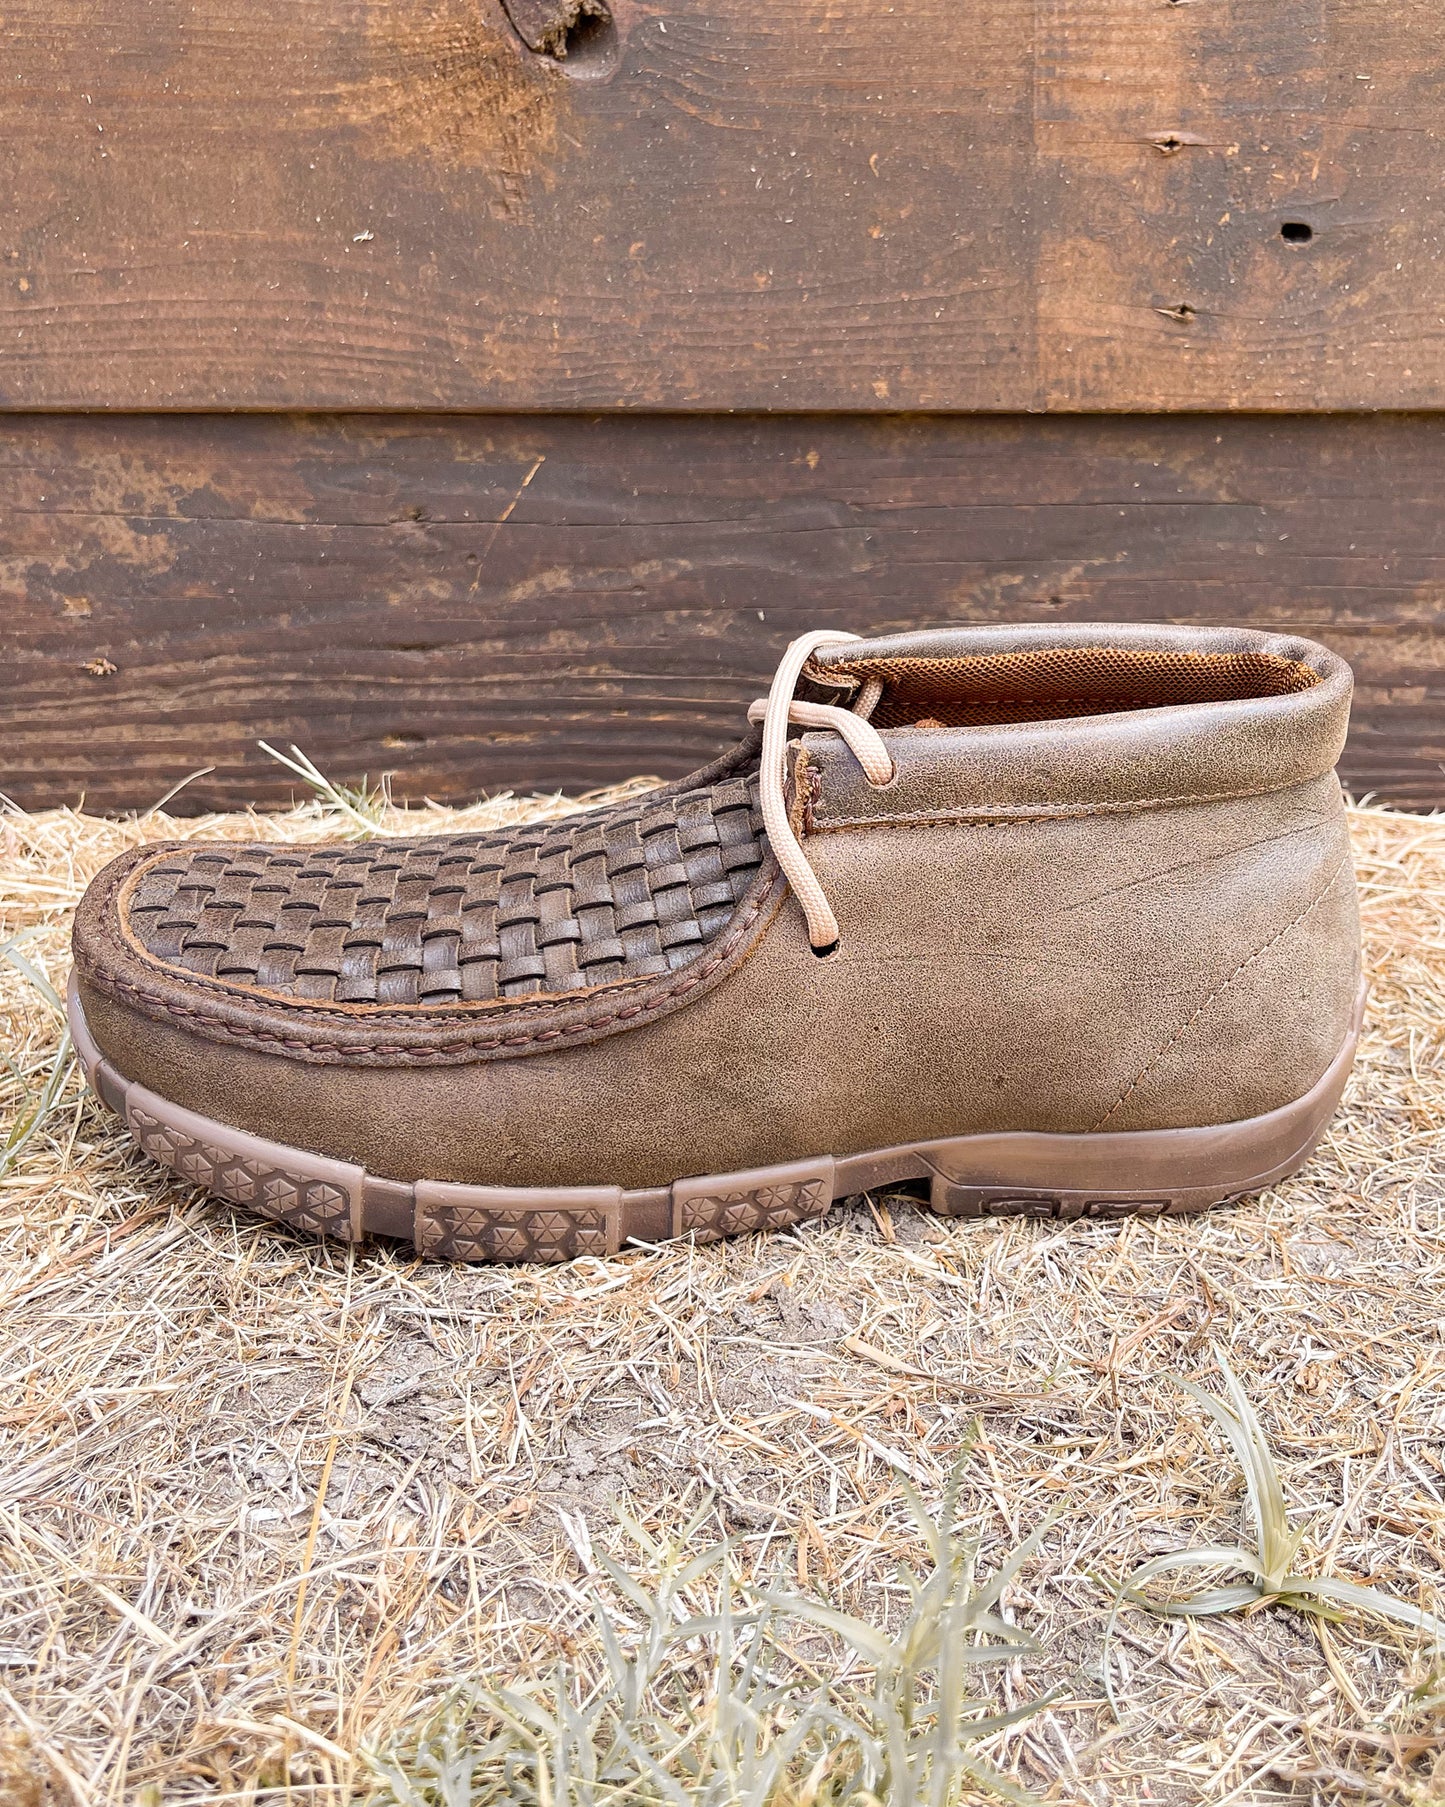 HAND WOVEN "THANG" | MEN MOCCASIN SHOES